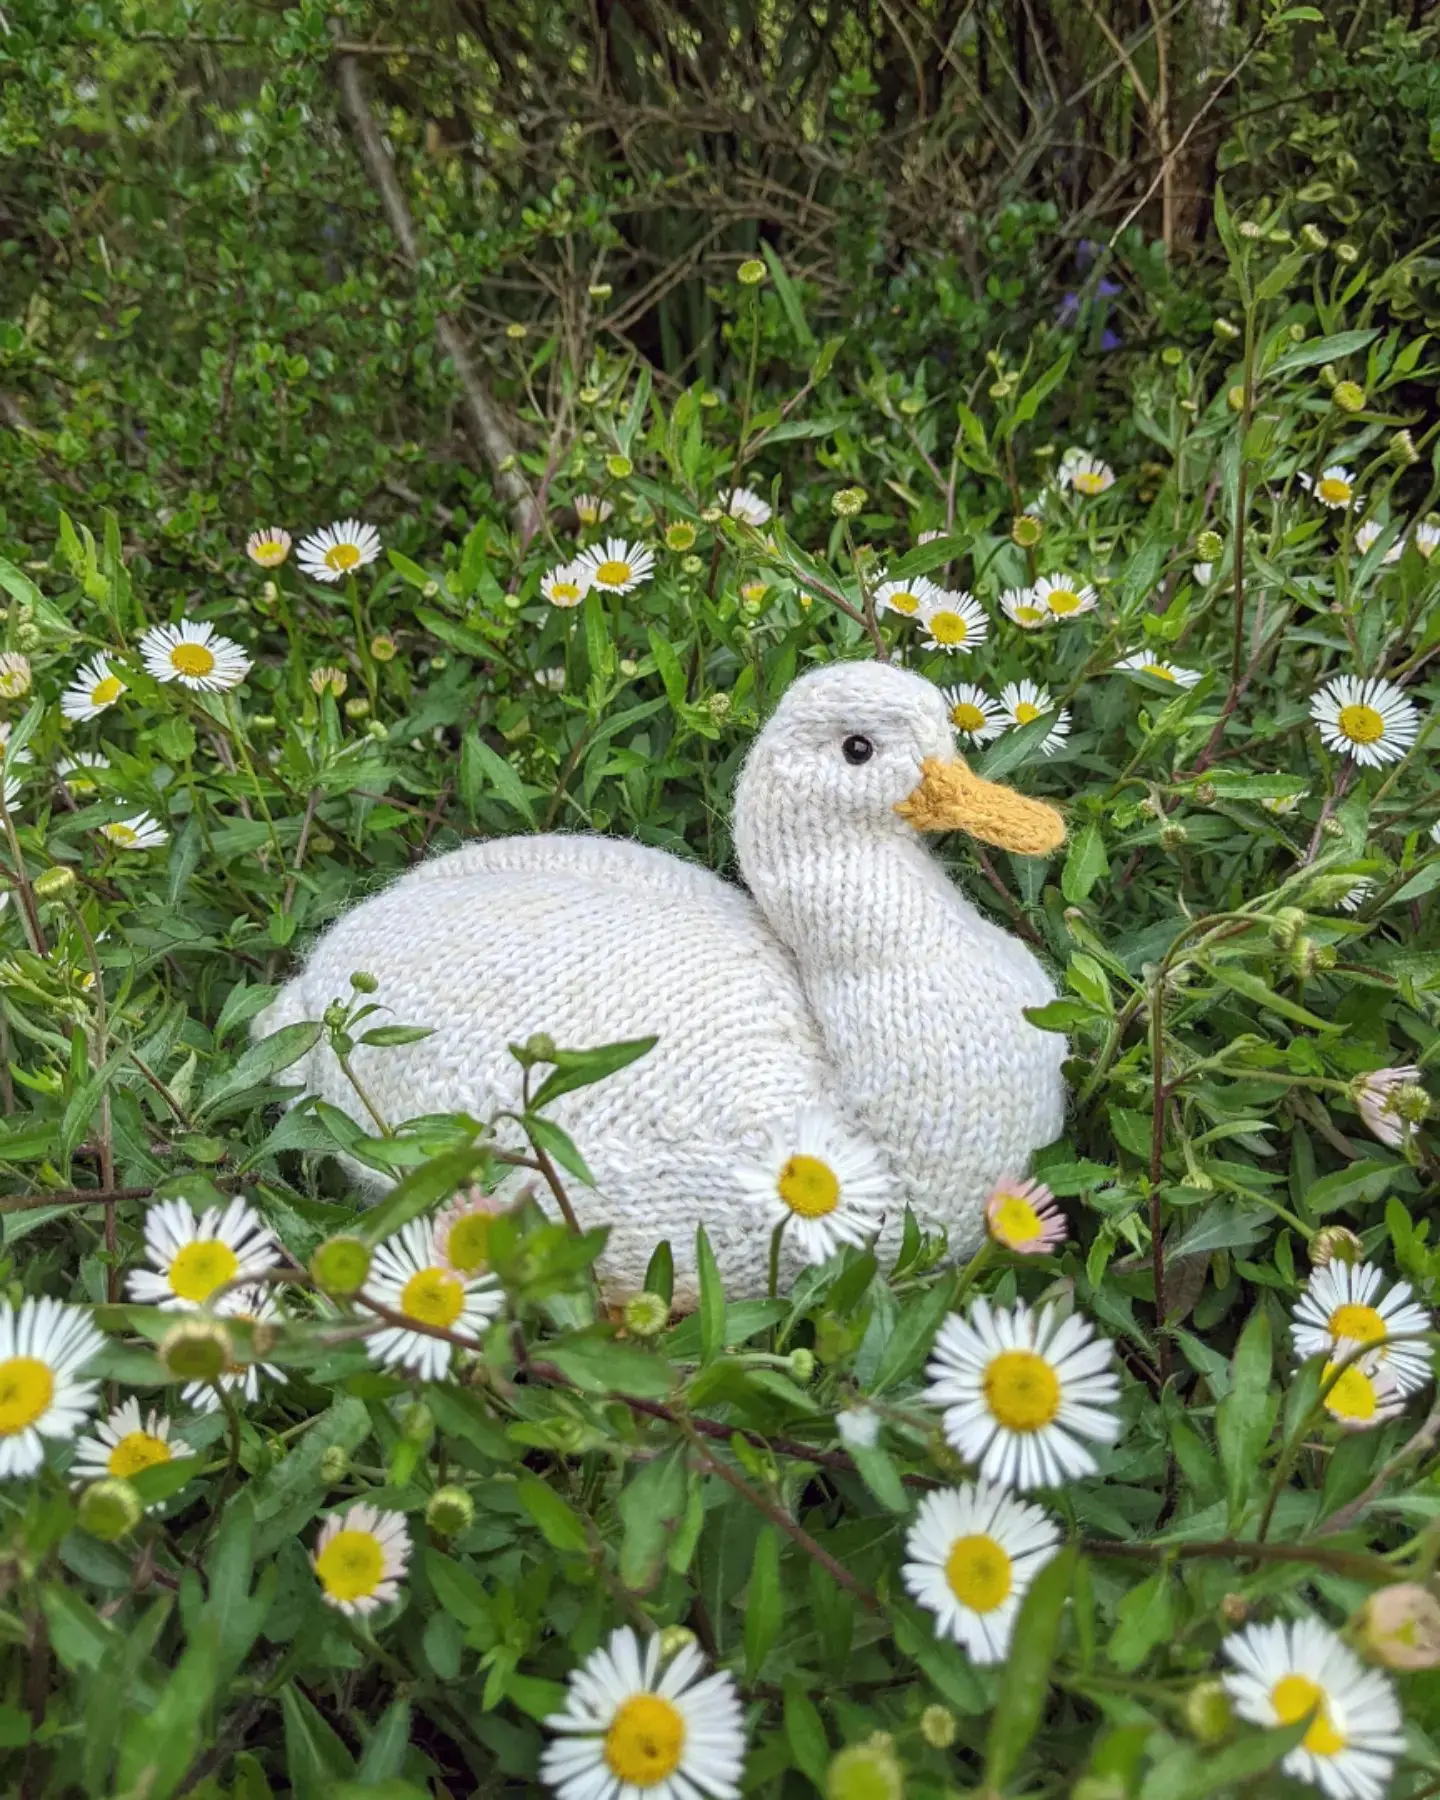 Crochet by India Rose Crawford